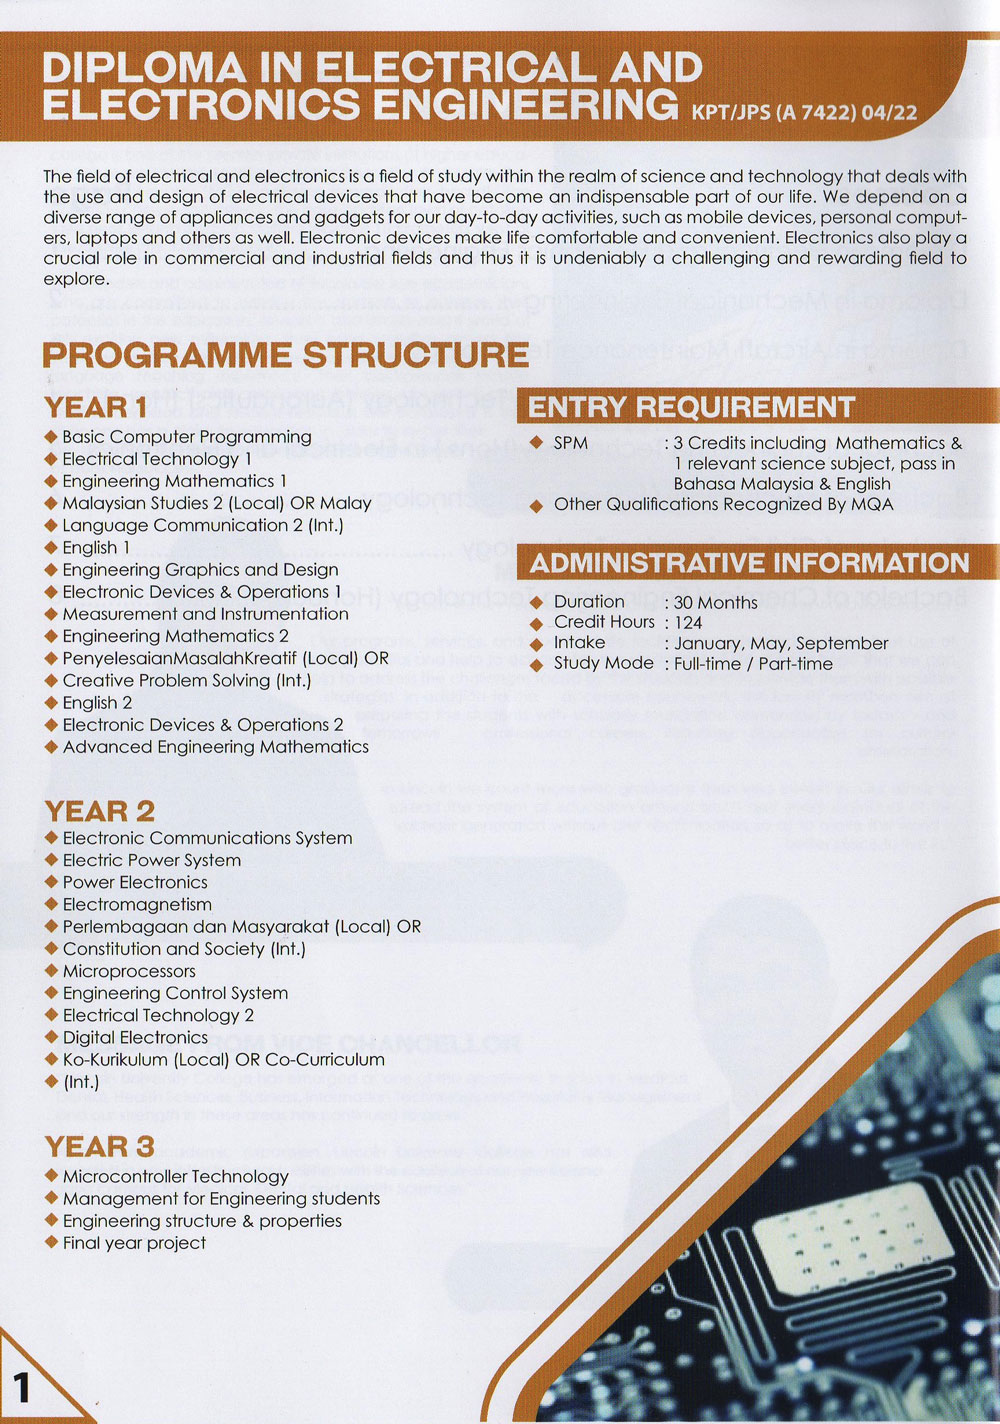 Diploma-In-Electrical-And-Electronic-Engineering-Lincoln-University-College